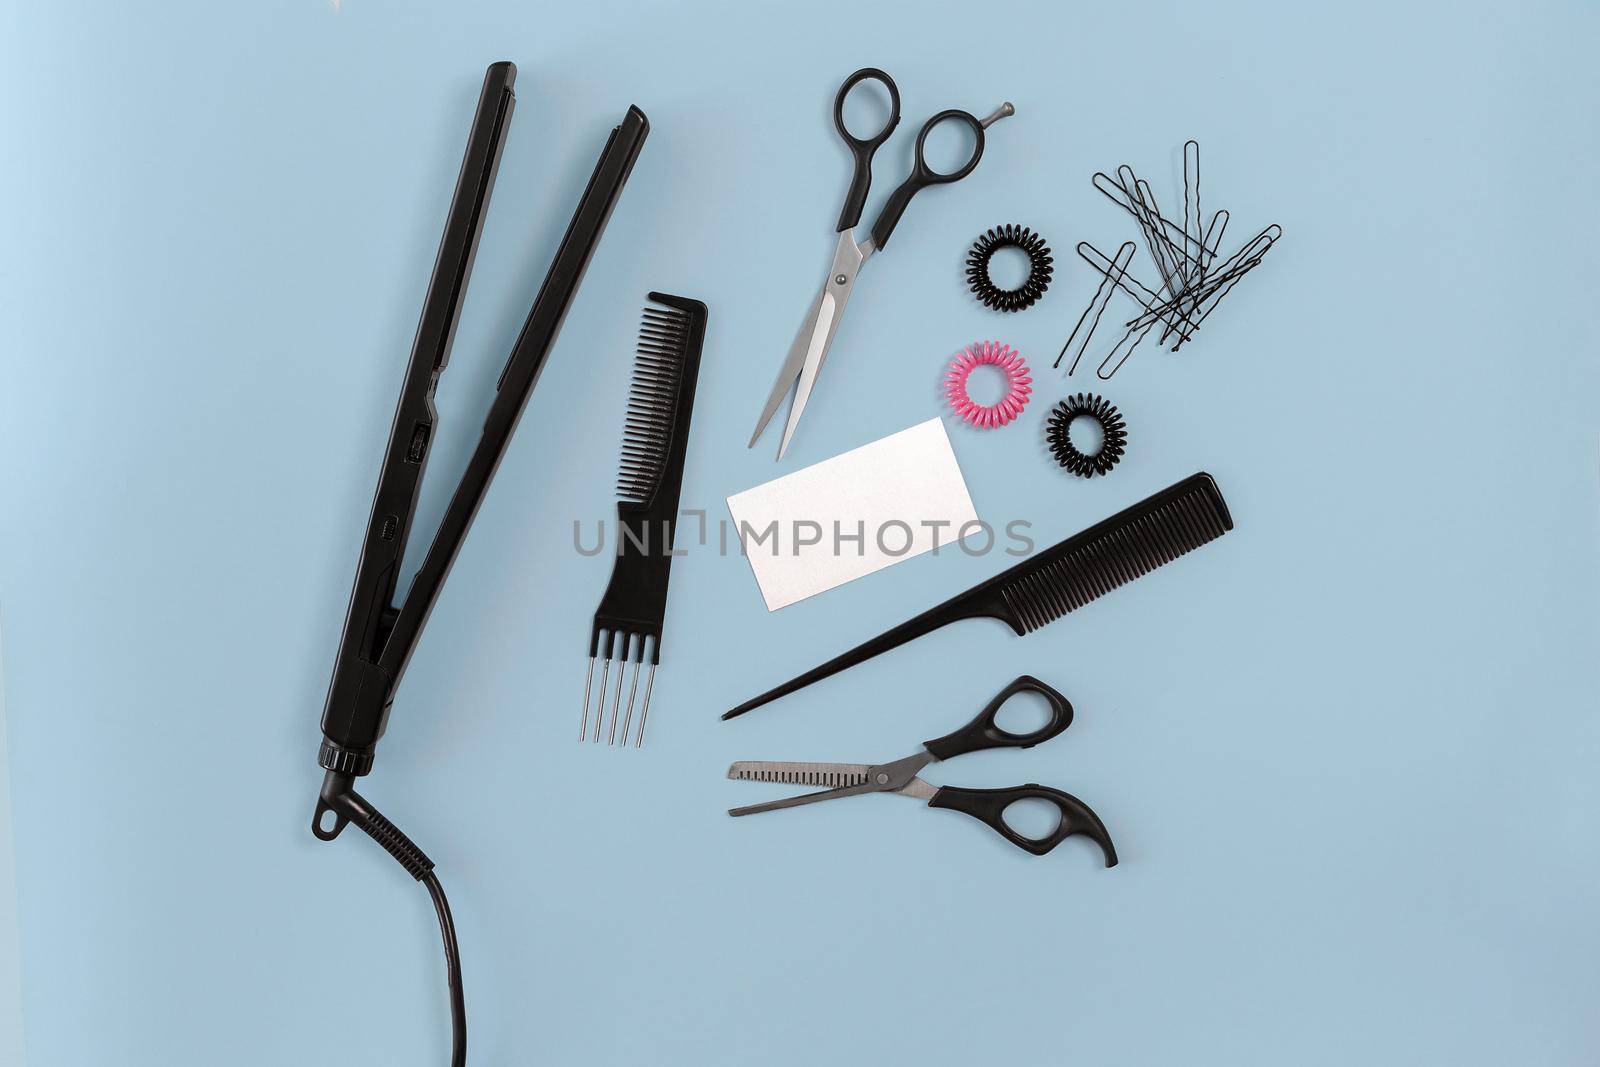 Hairdresser set with various accessories on blue background. Top view. Still life. Flat lay.